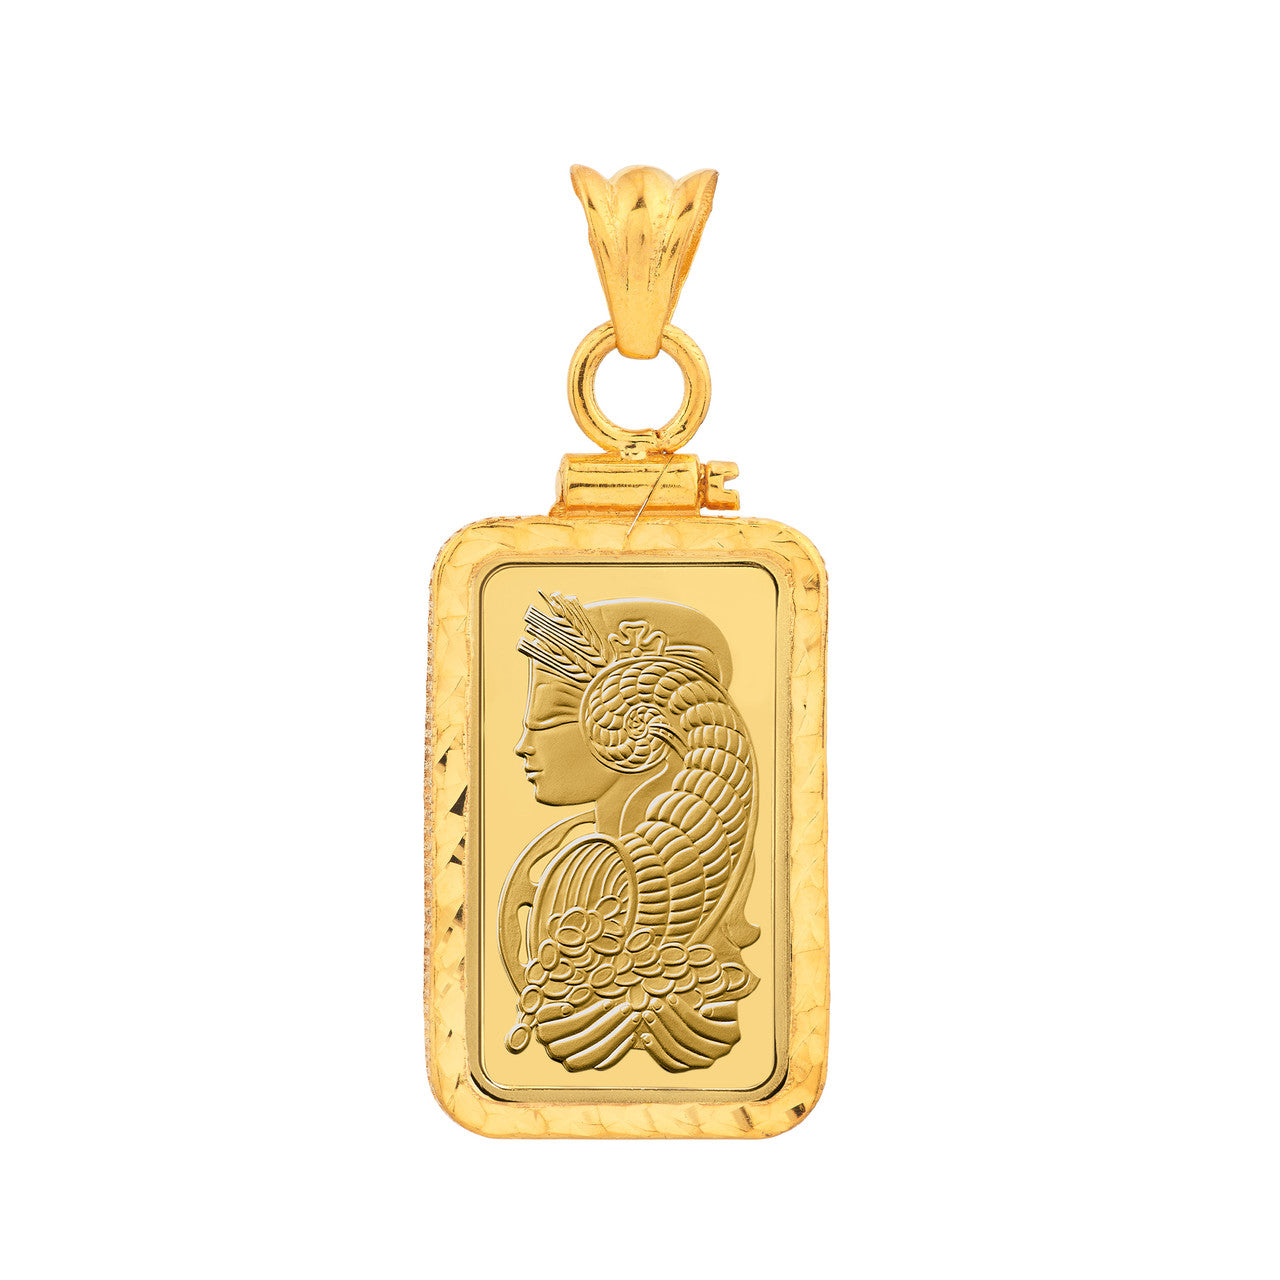 14K Yellow Gold Pamp Suisse Lady Fortuna 5 gram Bar Coin Bezel Diamond Cut Screw Top Frame Mounting Holder Pendant Charm